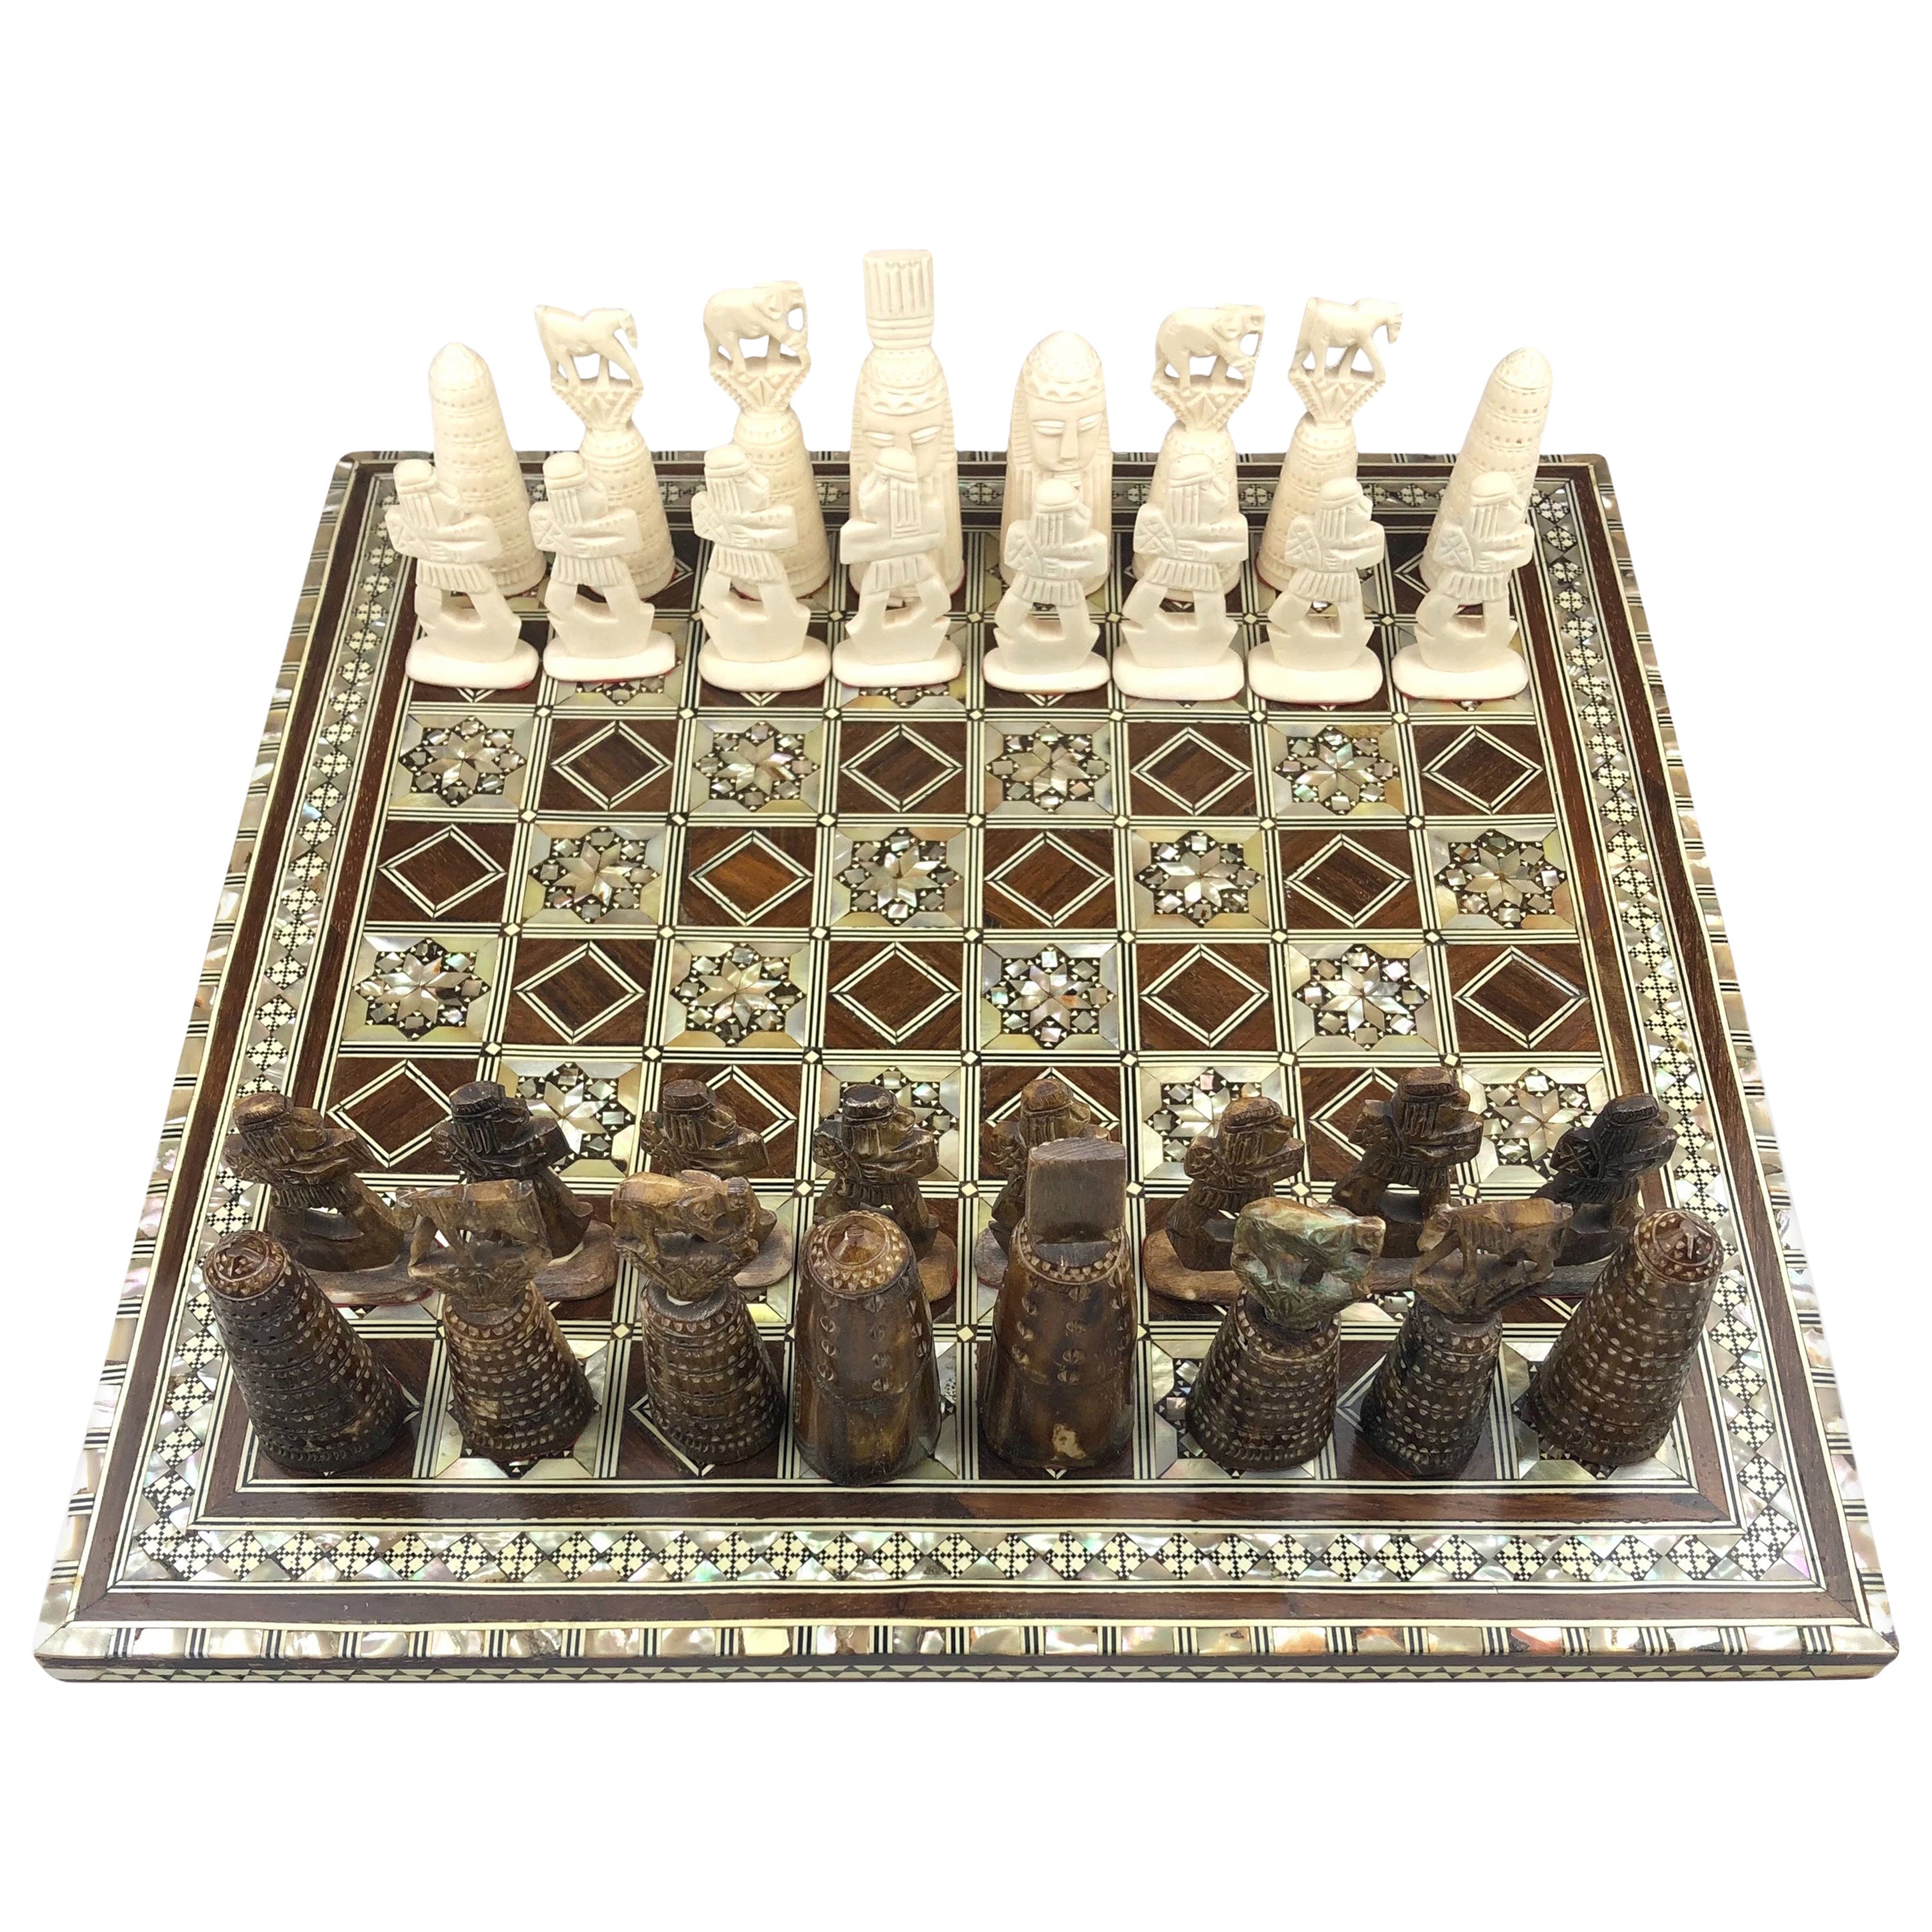 Mother-of-Pearl and Wooden Inlaid Marquetry Chess Set